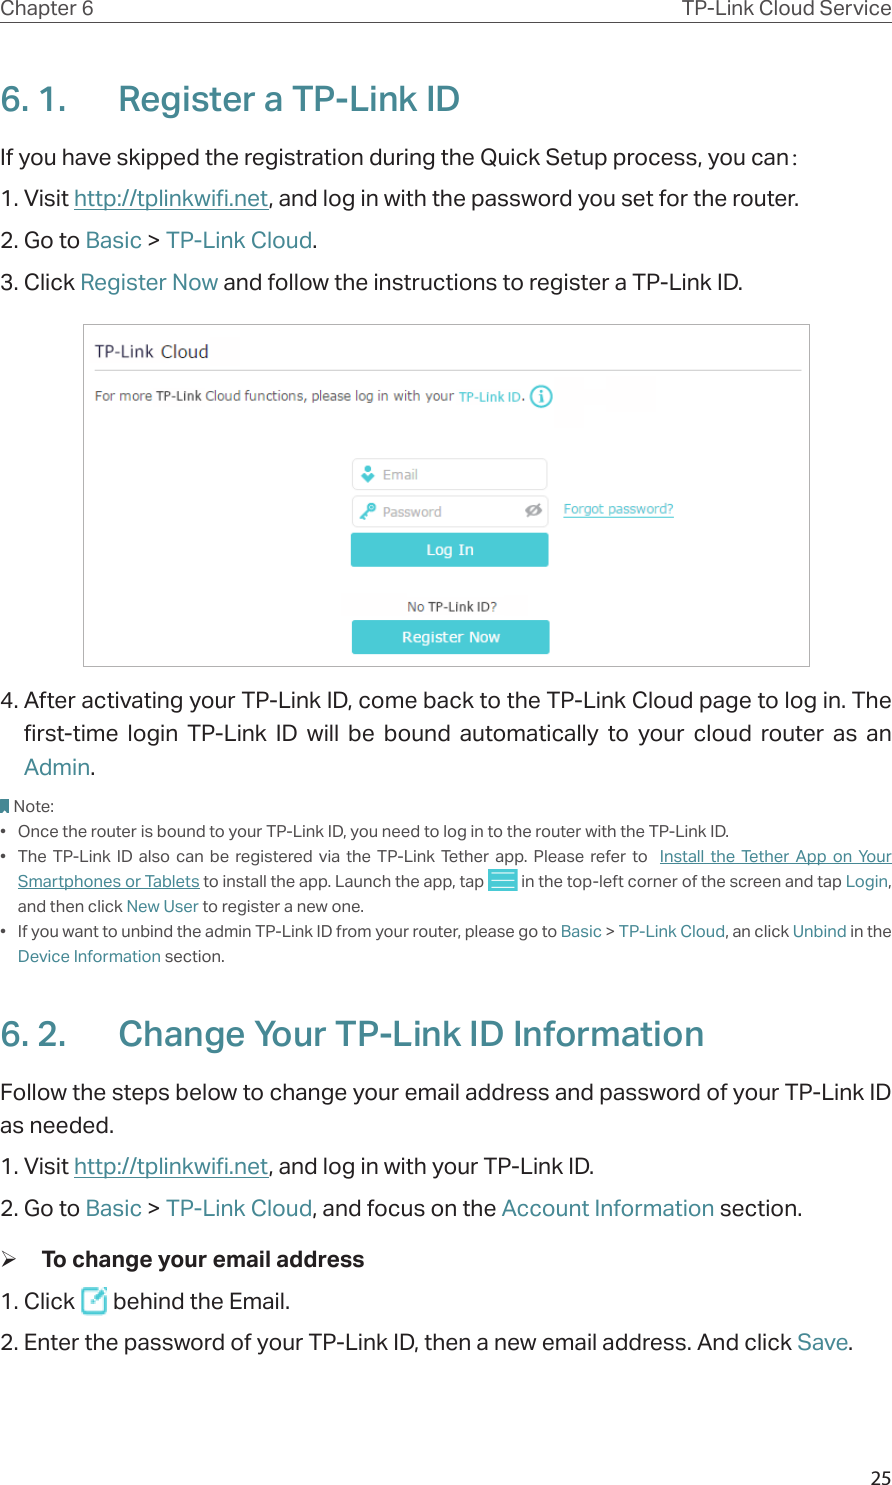 25Chapter 6 TP-Link Cloud Service6. 1.  Register a TP-Link IDIf you have skipped the registration during the Quick Setup process, you can：1. Visit http://tplinkwifi.net, and log in with the password you set for the router.2. Go to Basic &gt; TP-Link Cloud.3. Click Register Now and follow the instructions to register a TP-Link ID.4. After activating your TP-Link ID, come back to the TP-Link Cloud page to log in. The first-time login TP-Link ID will be bound automatically to your cloud router as an Admin.Note:•  Once the router is bound to your TP-Link ID, you need to log in to the router with the TP-Link ID. •  The TP-Link ID also can be registered via the TP-Link Tether app. Please refer to  Install the Tether App on Your Smartphones or Tablets to install the app. Launch the app, tap   in the top-left corner of the screen and tap Login, and then click New User to register a new one.•  If you want to unbind the admin TP-Link ID from your router, please go to Basic &gt; TP-Link Cloud, an click Unbind in the Device Information section.6. 2.  Change Your TP-Link ID InformationFollow the steps below to change your email address and password of your TP-Link ID as needed.1. Visit http://tplinkwifi.net, and log in with your TP-Link ID.2. Go to Basic &gt; TP-Link Cloud, and focus on the Account Information section. ¾To change your email address1. Click   behind the Email.2. Enter the password of your TP-Link ID, then a new email address. And click Save.